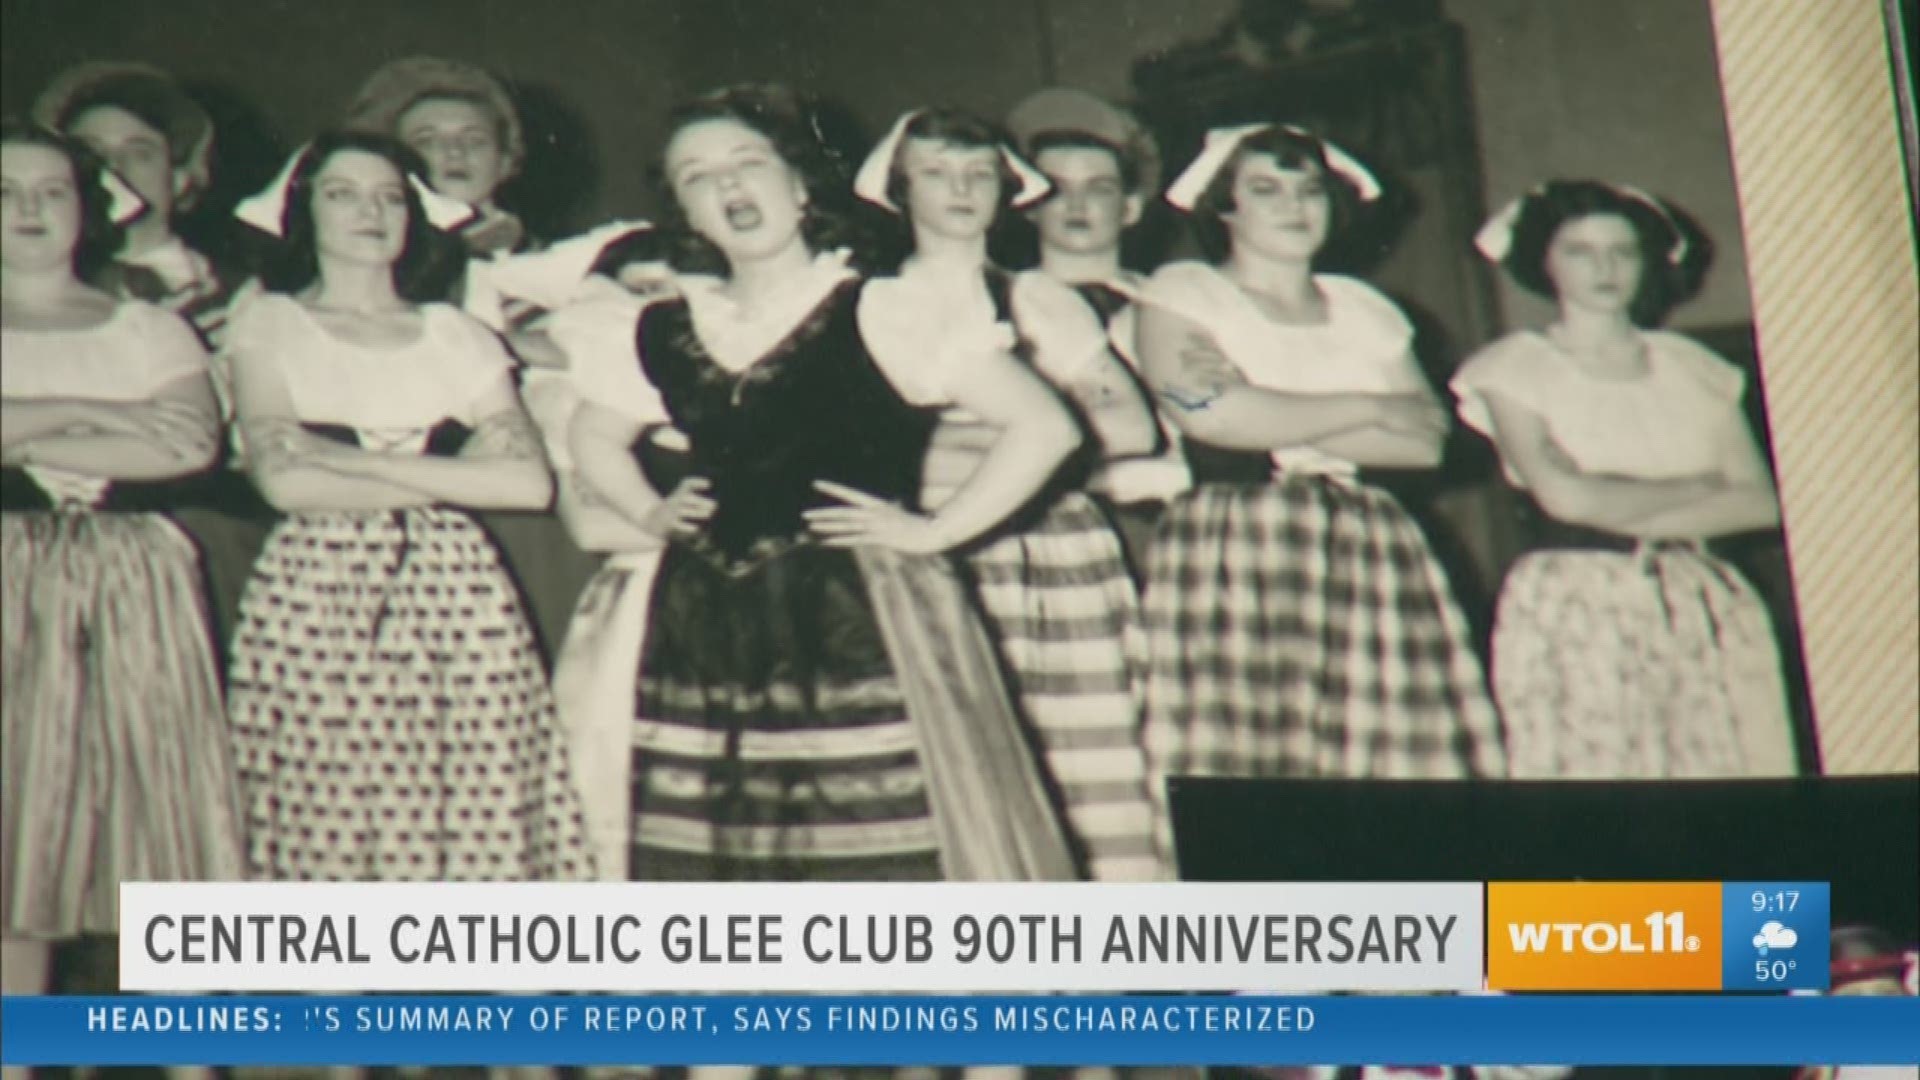 Celebrate the 90th anniversary of the Central Catholic Glee Club with all generations